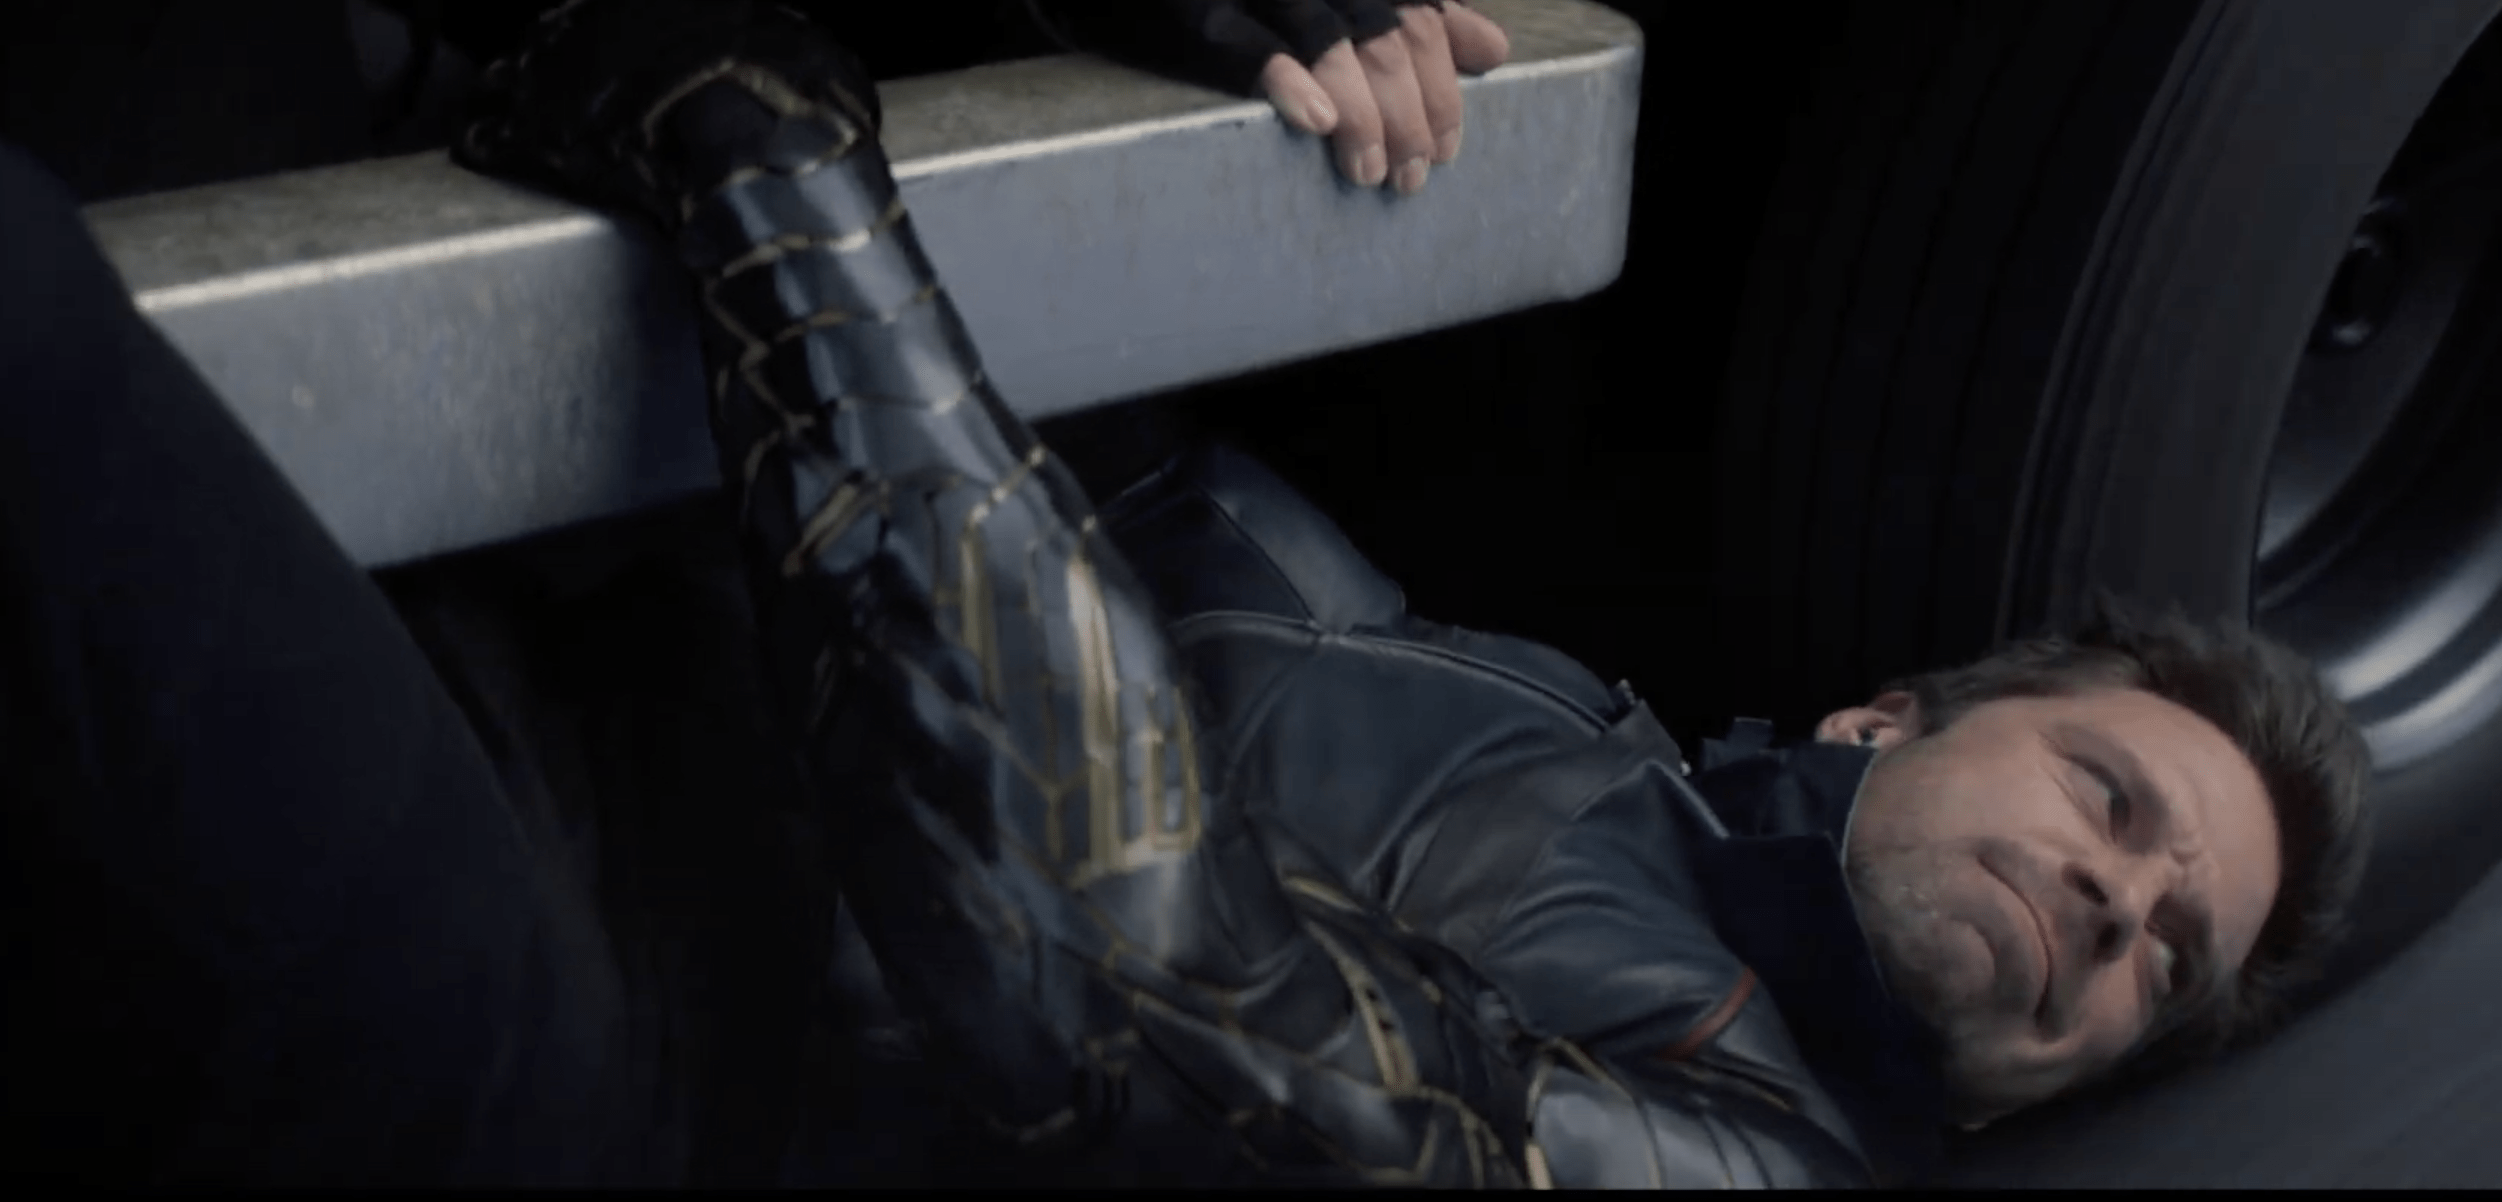 falcon and the winter soldier trailer 2 breakdown Bucky arm